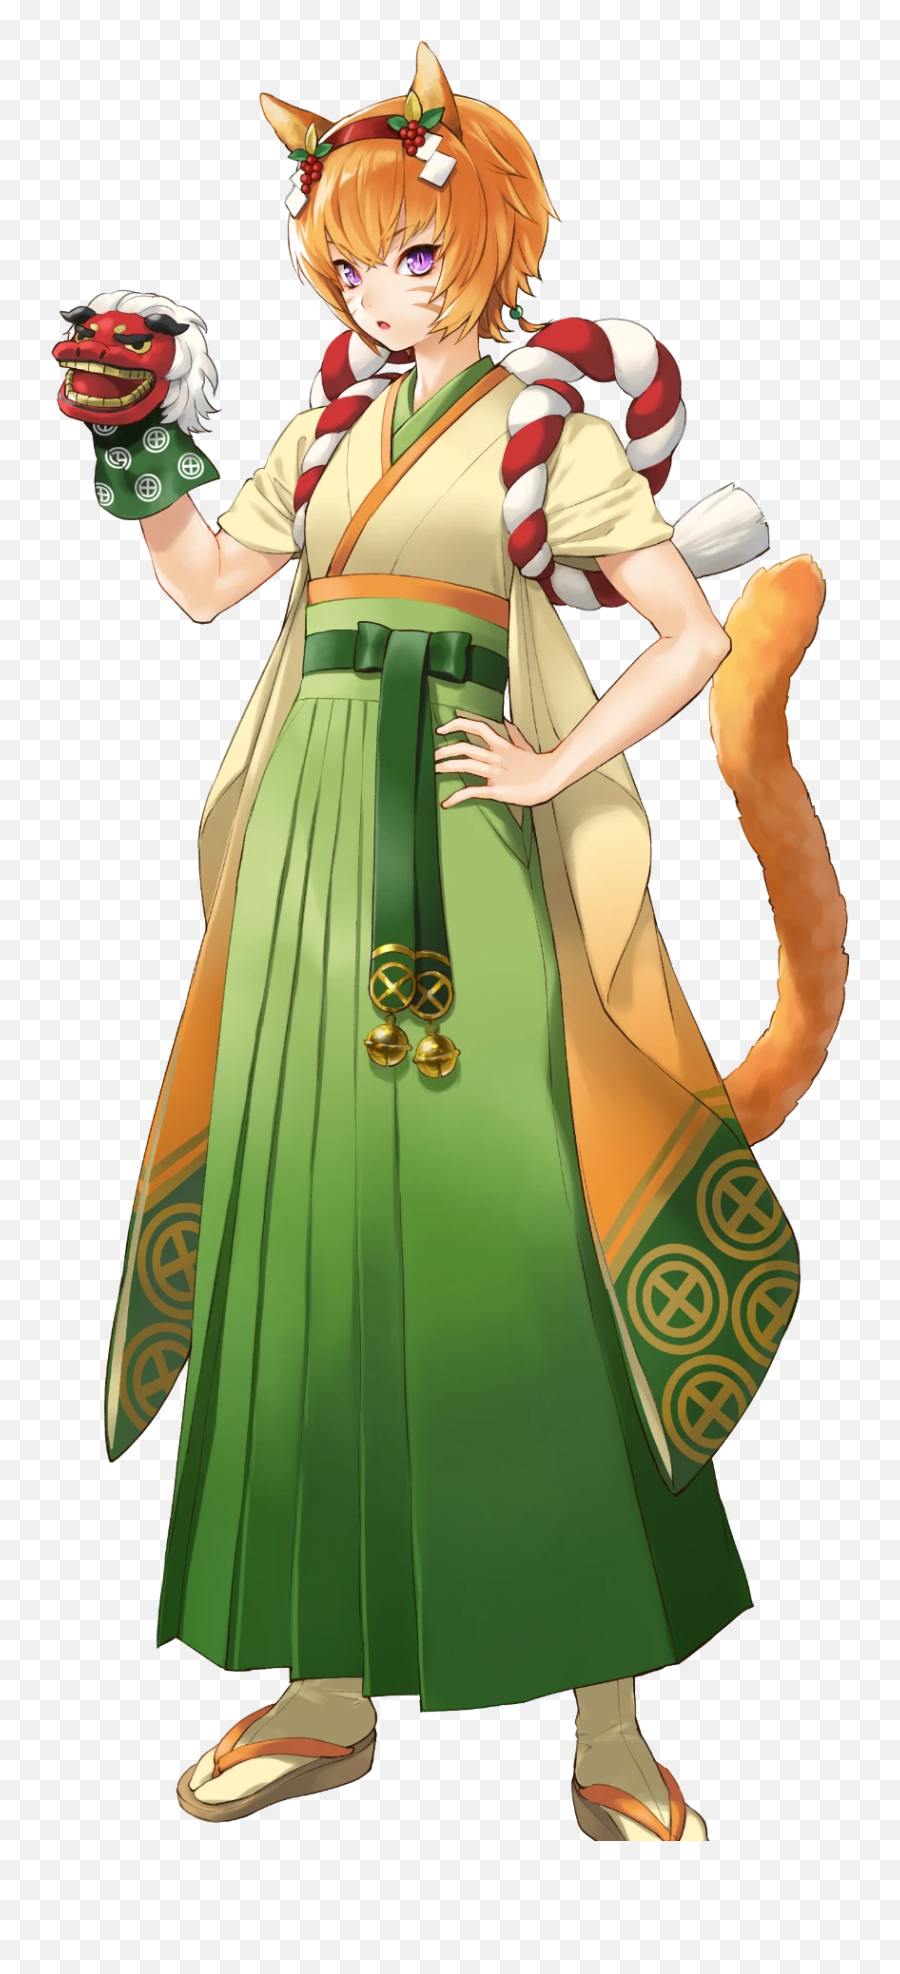 Filelethe New Years Claw Facewebp - Fire Emblem Heroes Wiki Lethe Fire Emblem Heroes Png,Claw Transparent